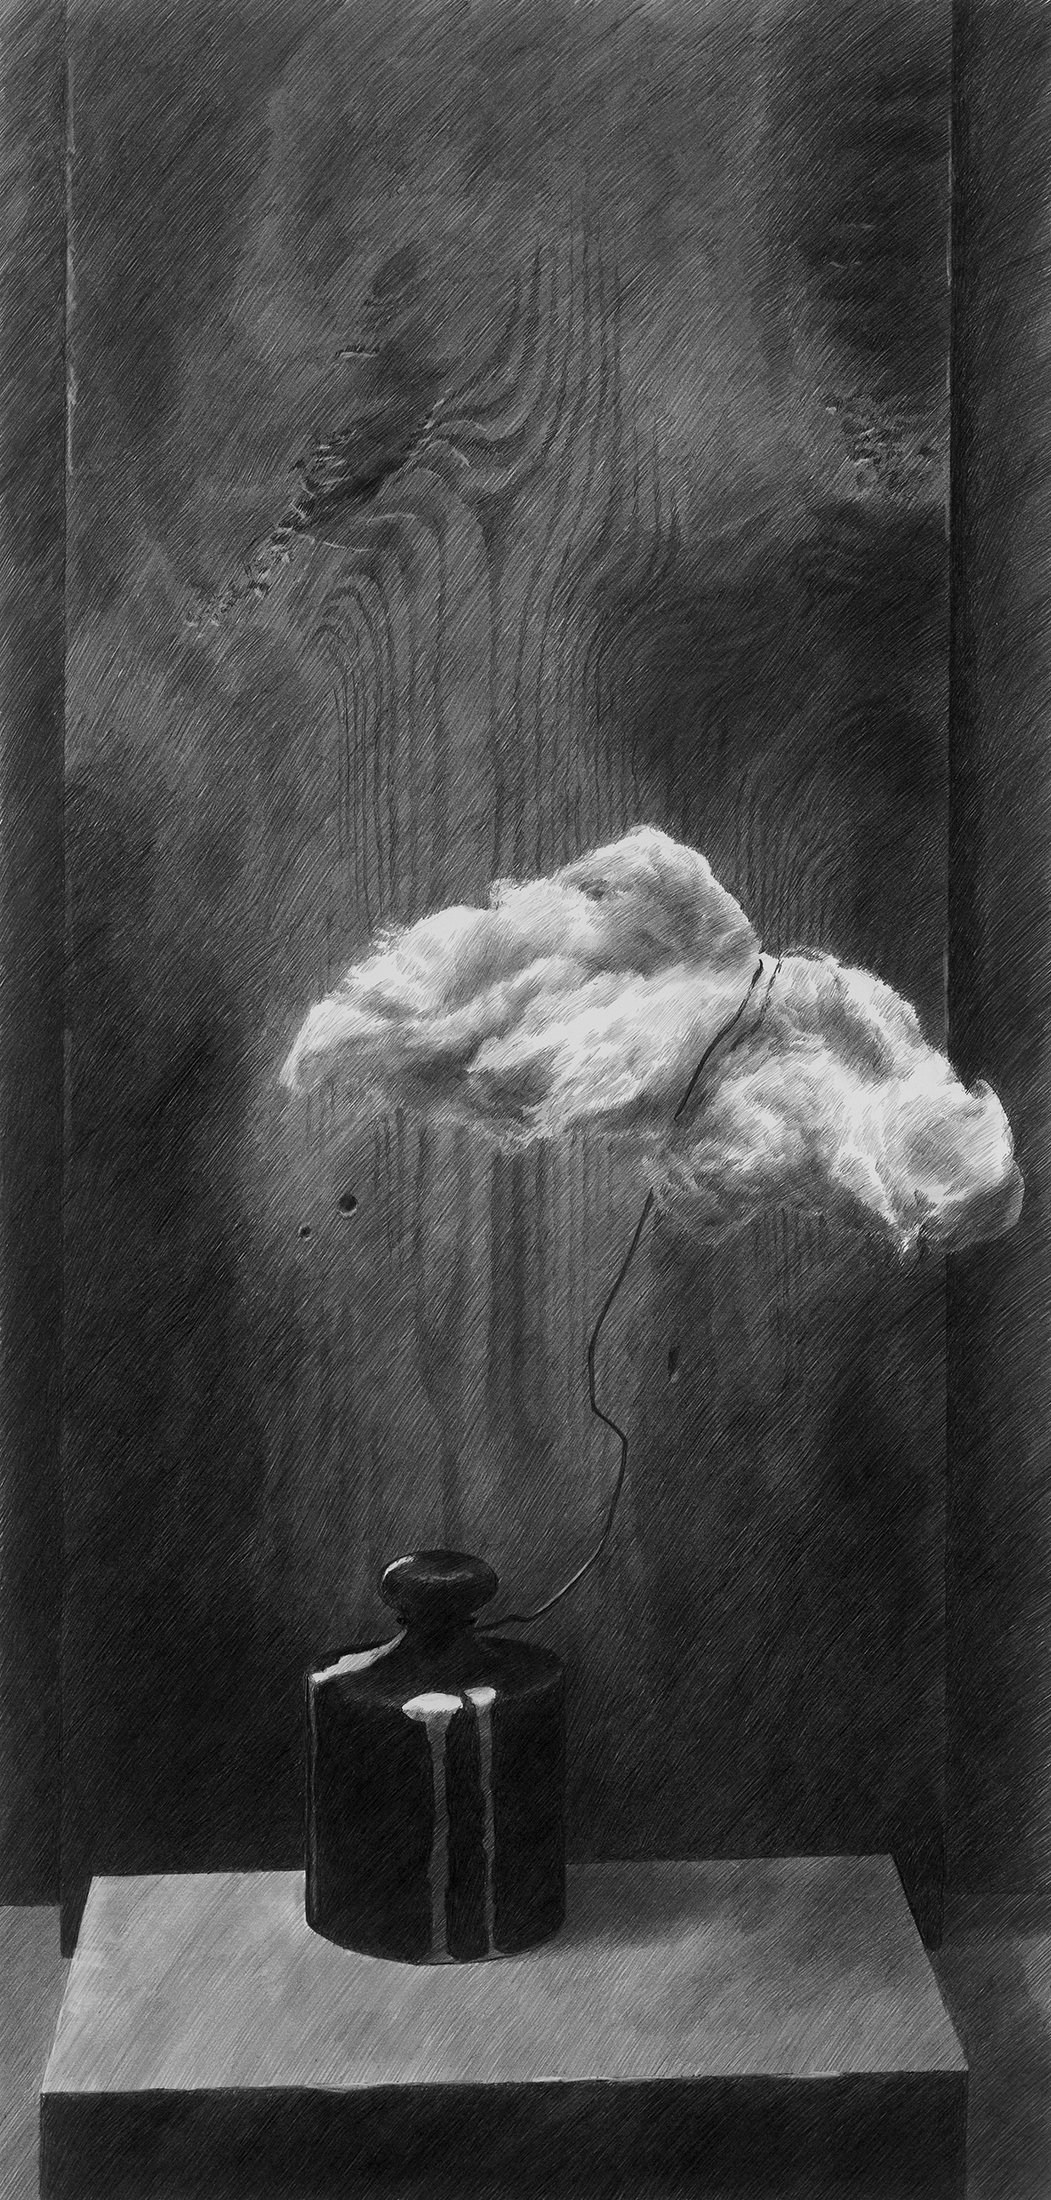 A Cloud in the Sky, graphite 0.3-0.7 on paper, 240mm x 500mm, 2022 - original drawing available for: 150.000 HUF; fine art print for: 90.000 HUF